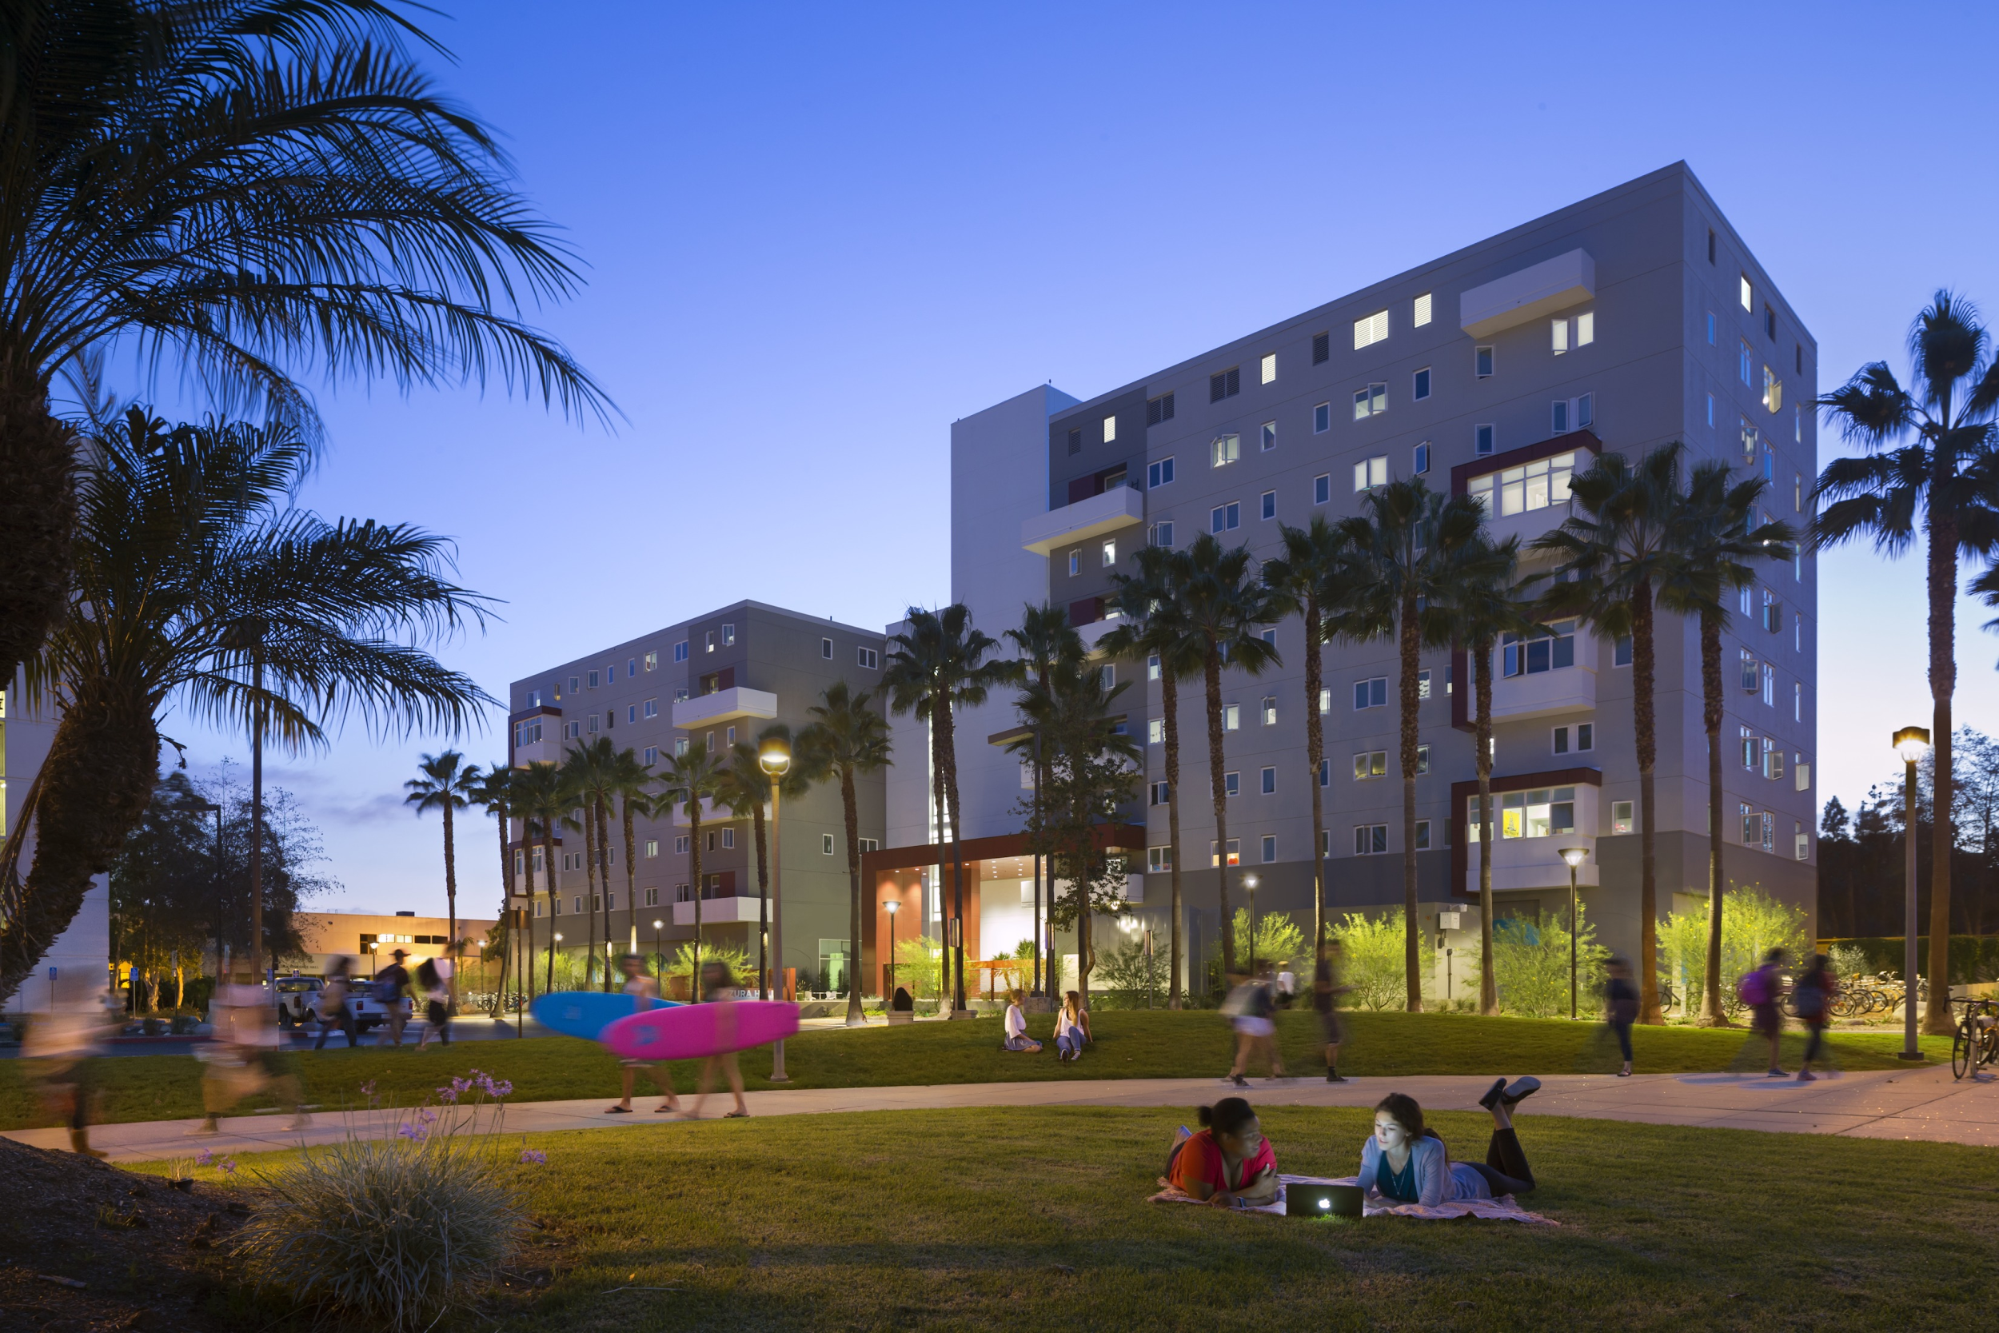 Architects can better student housing design standards.